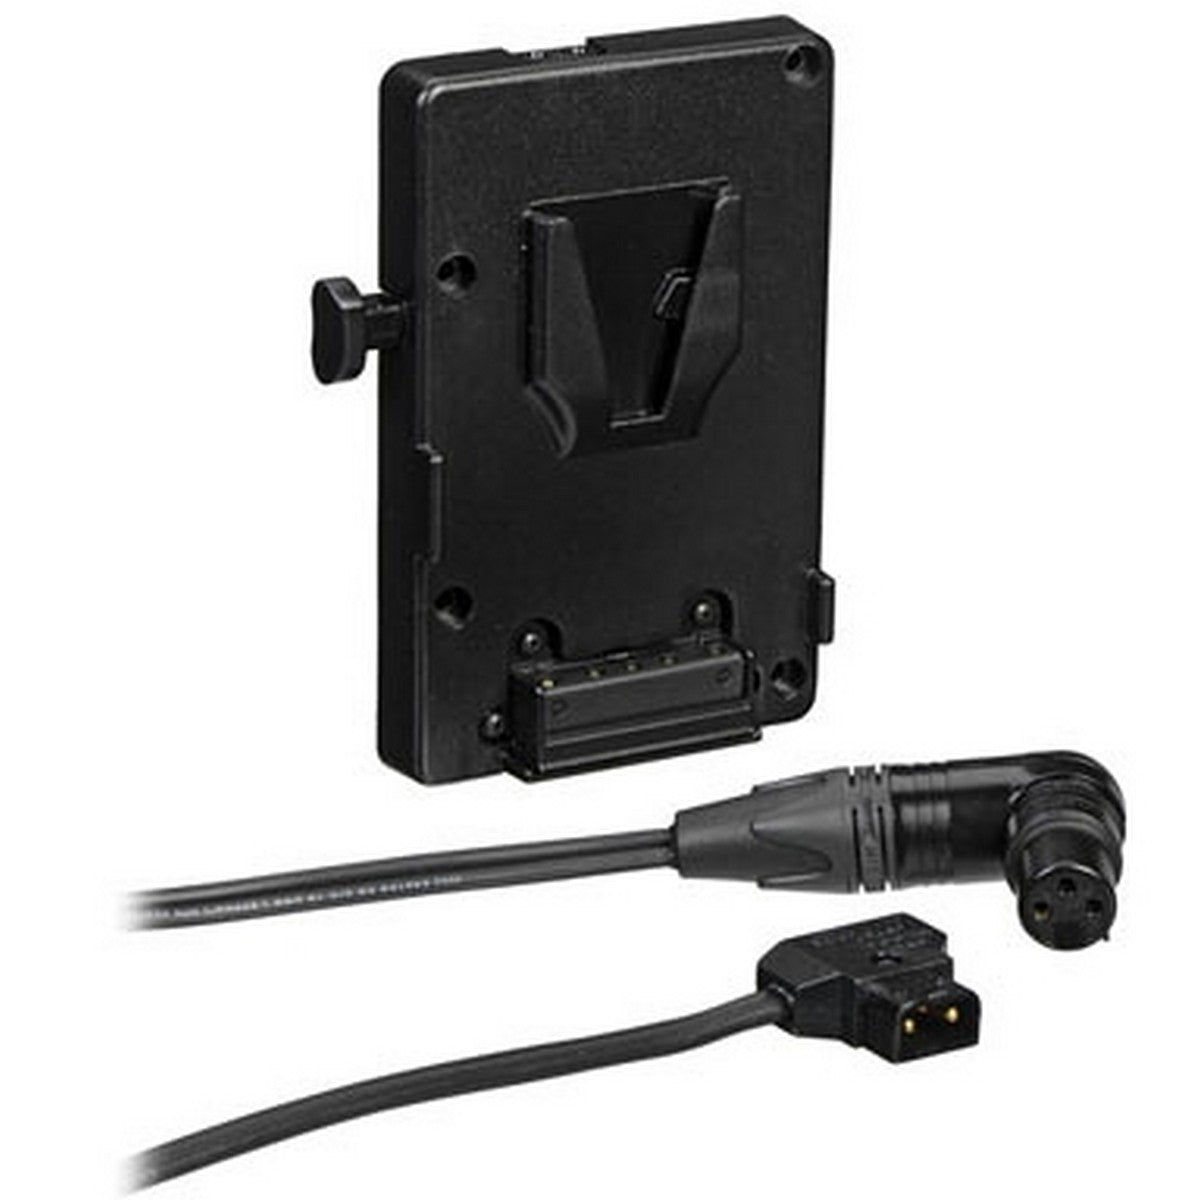 Litepanels Astra 1x1 V-Mount Battery Bracket with P-Tap to 3 Pin XLR Cable | A/B Battery Bracket 900-3508